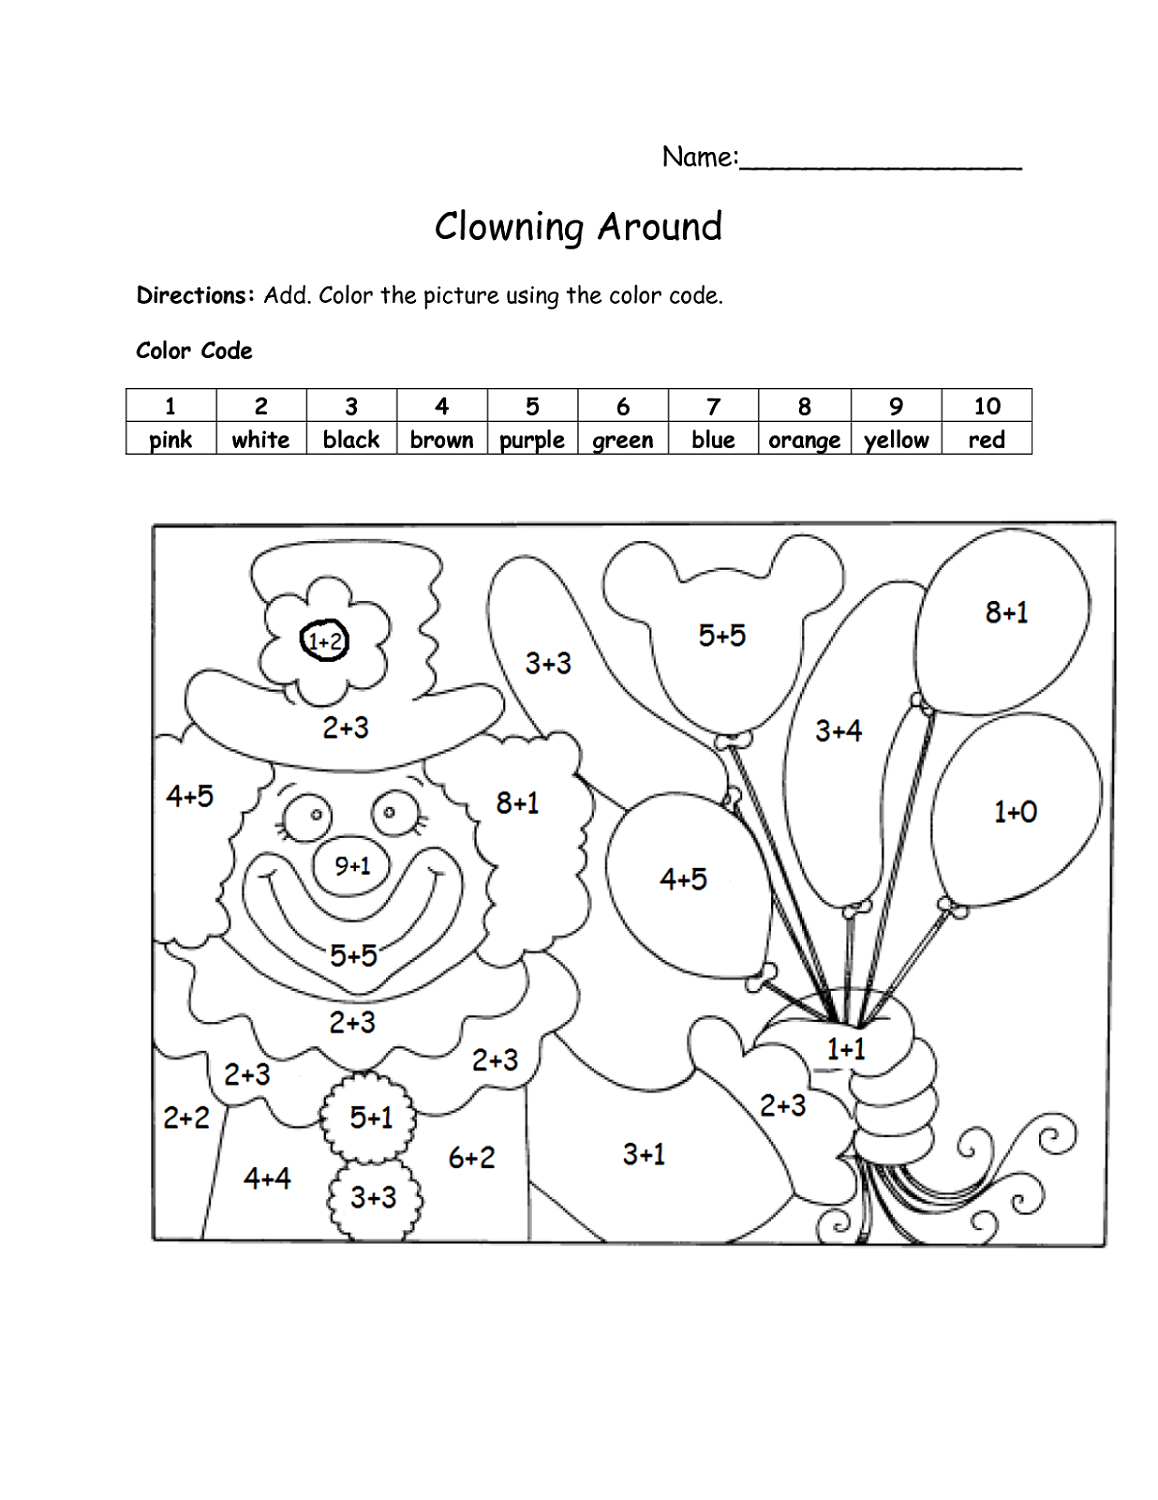 2nd grade vocabulary worksheets k5 learning